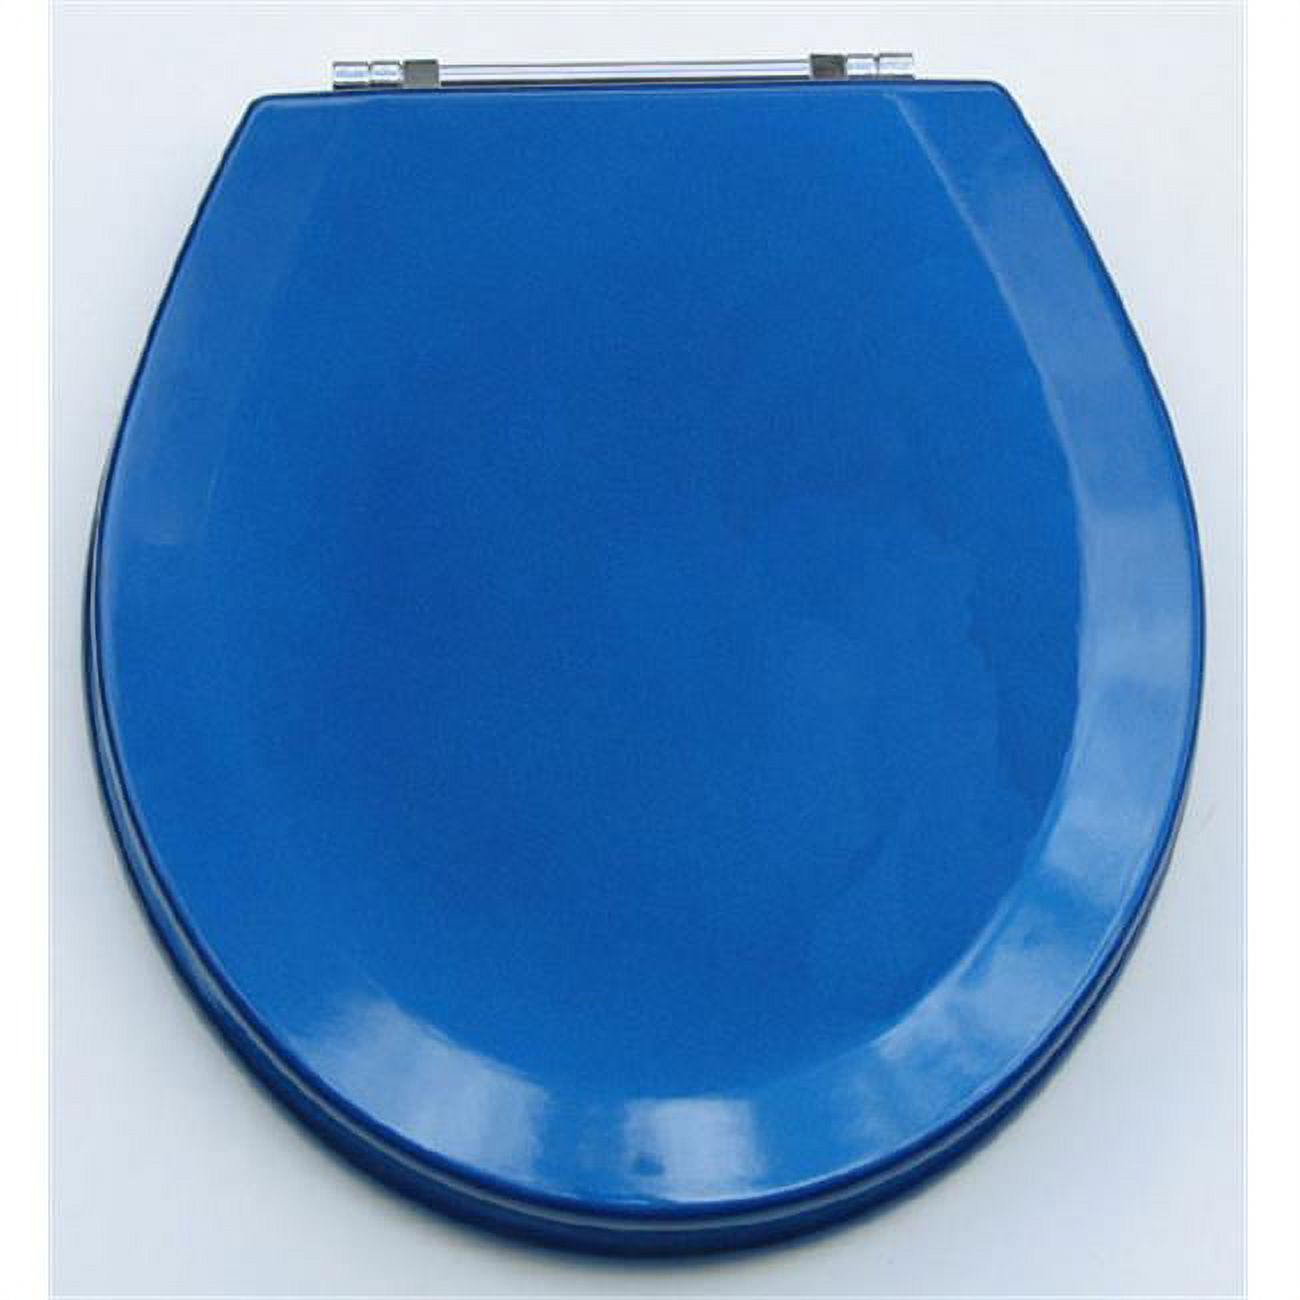 American Trading House MDF-300 Premium Toilet Seat Blue - image 1 of 5